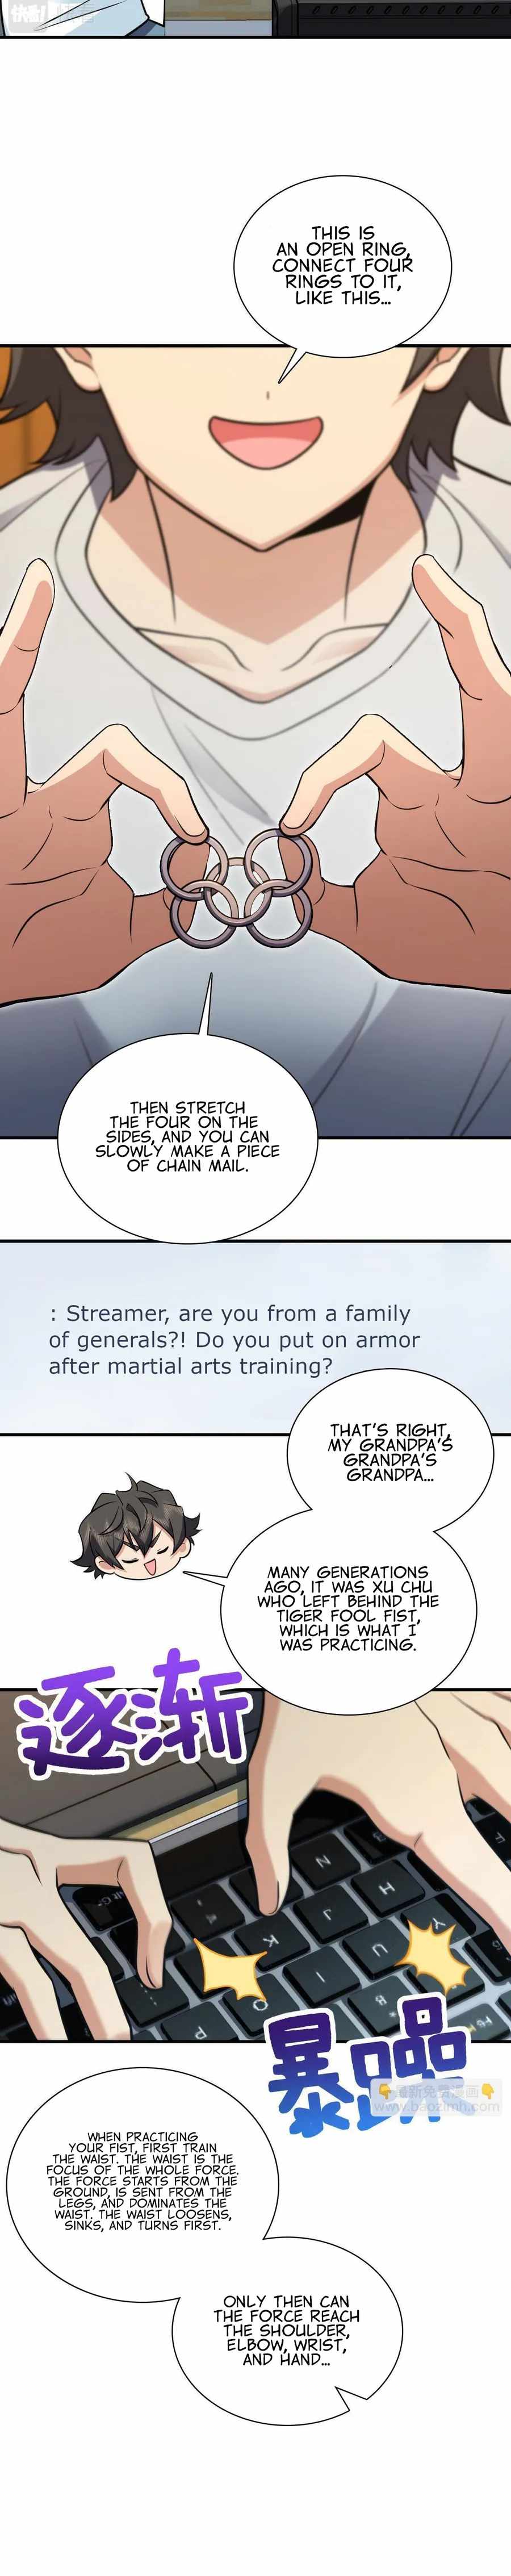 My Wife Is From a Thousand Years Ago Chapter 138-eng-li - Page 7